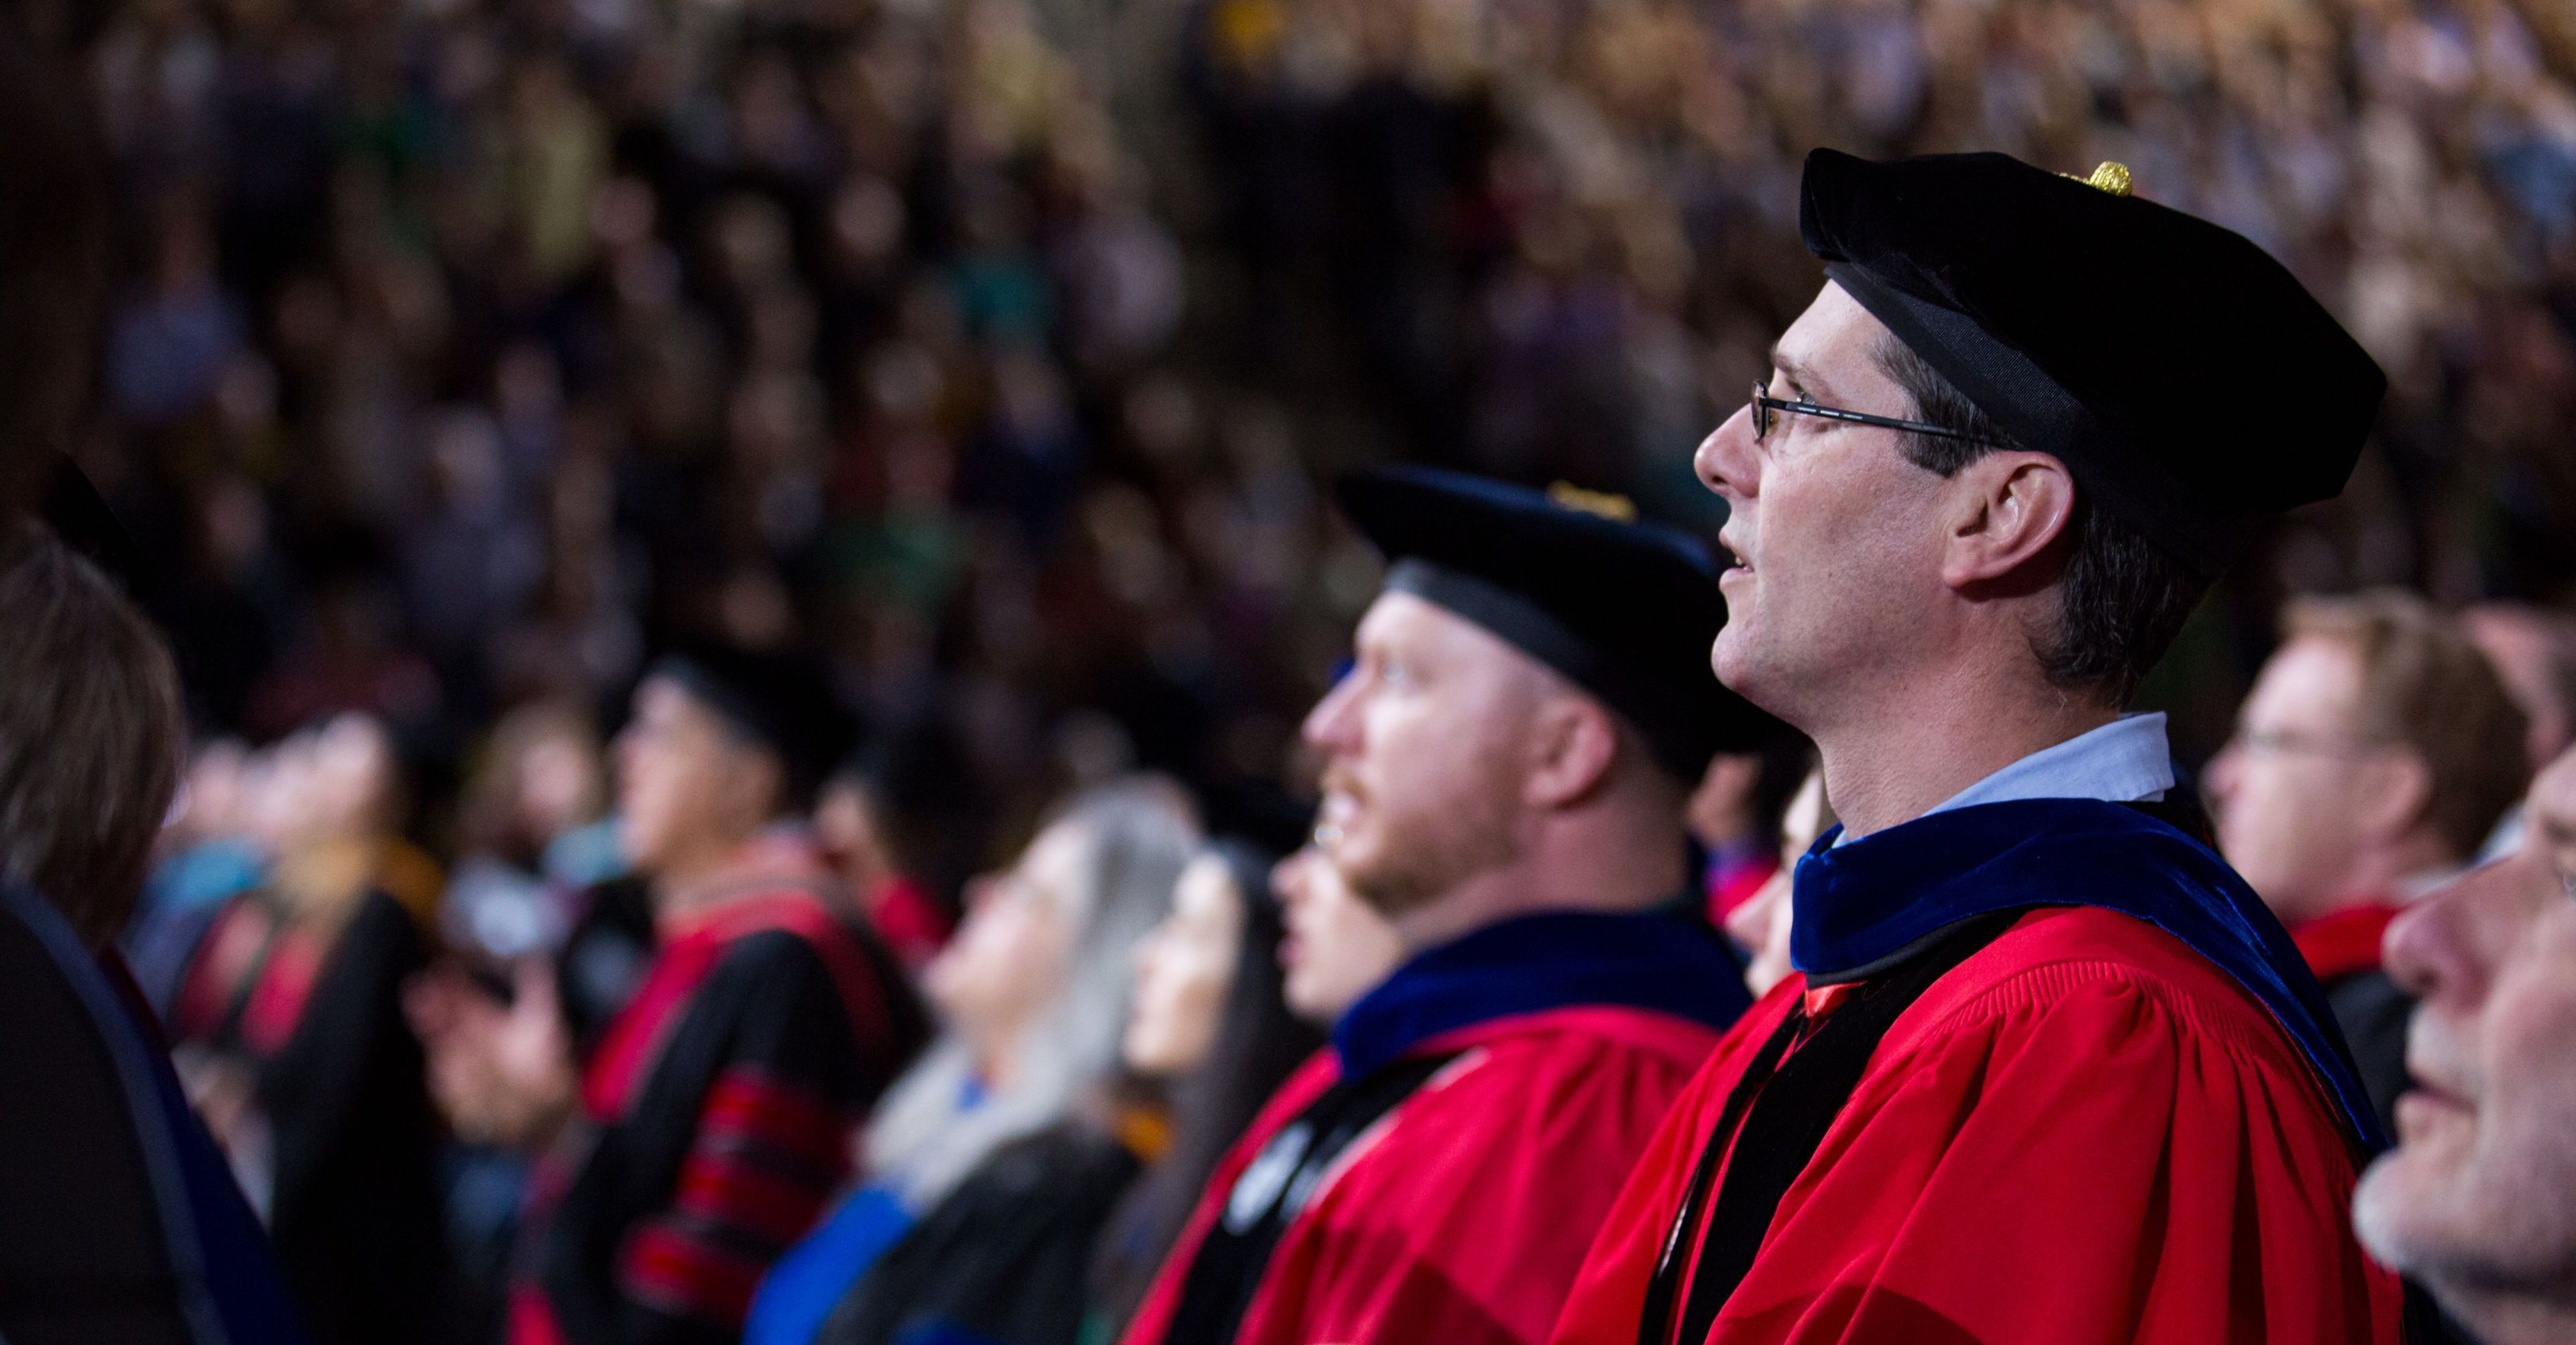 Online Doctorate Degree | Doctoral Programs at Liberty University